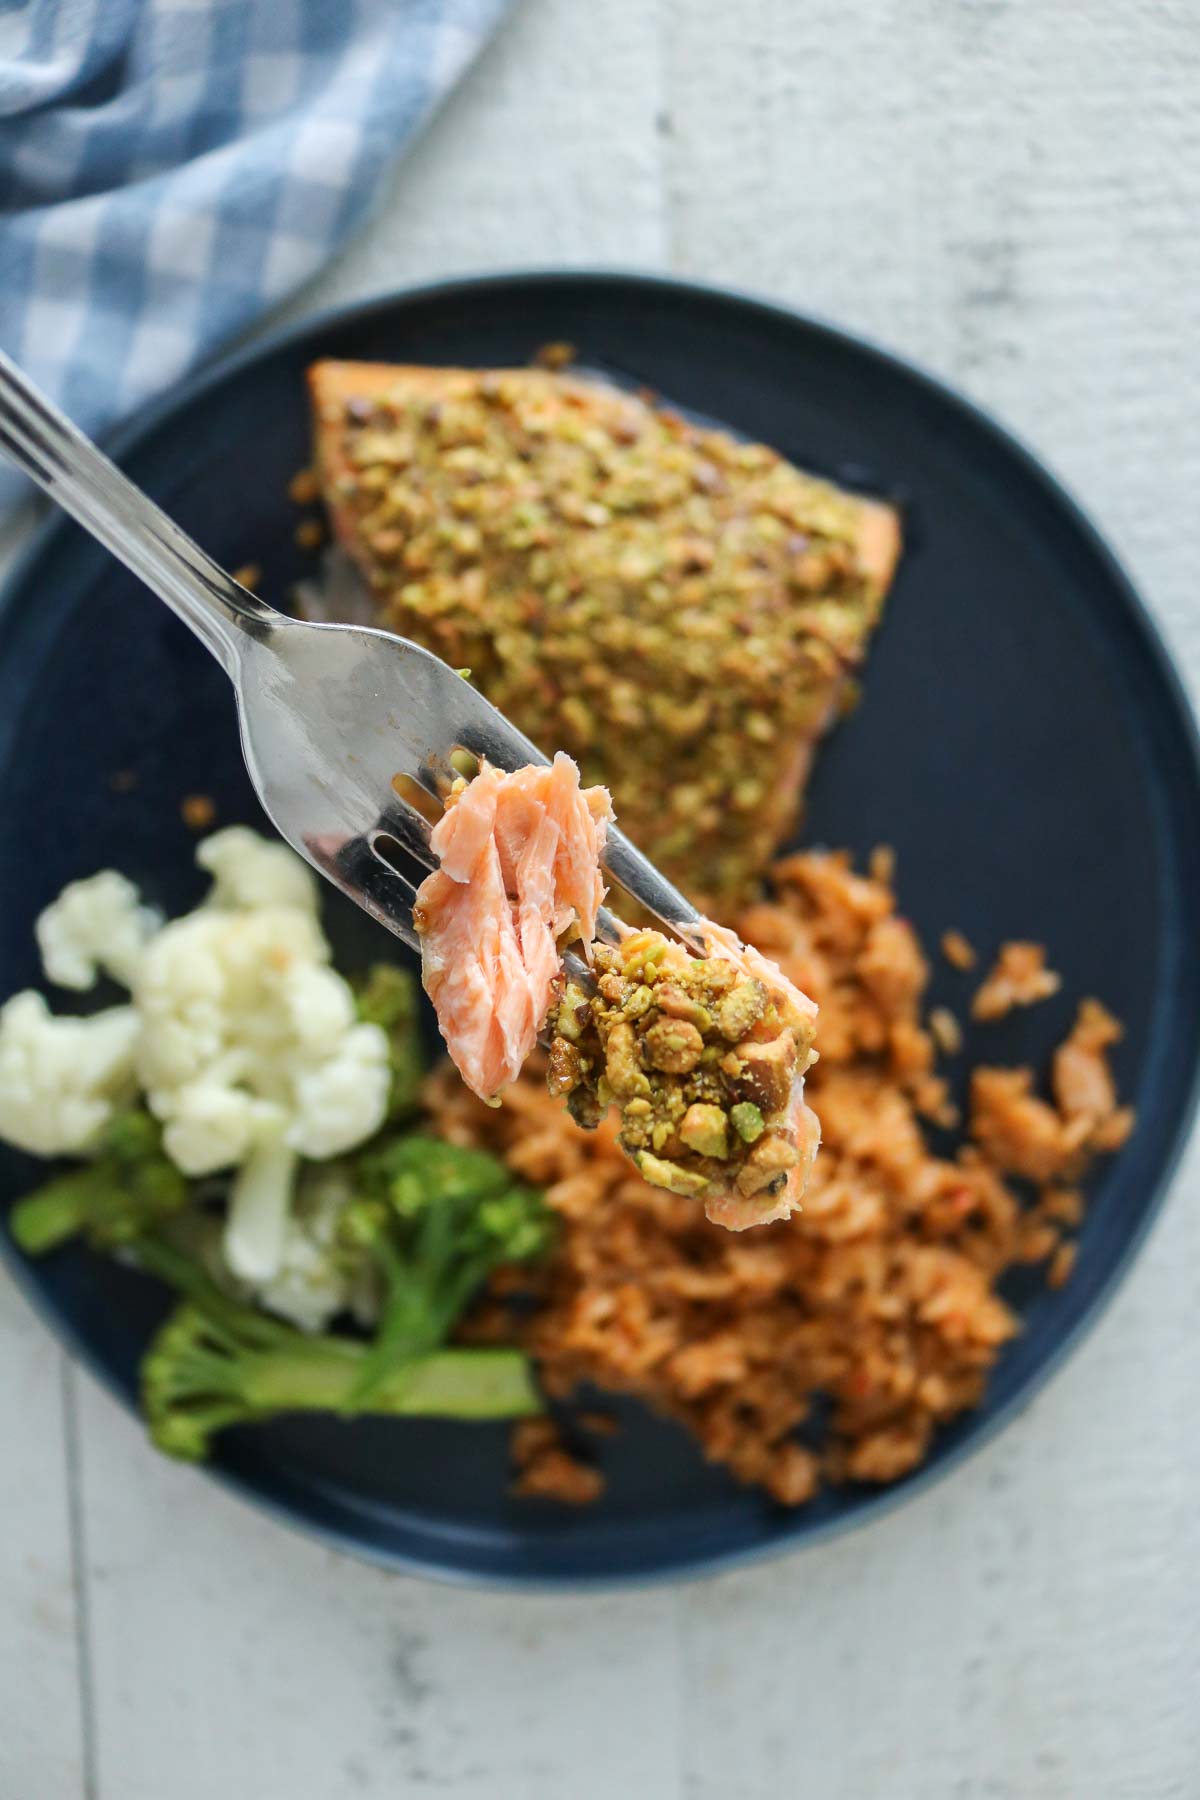 Forkful of pistachio-topped arctic char from a plate.